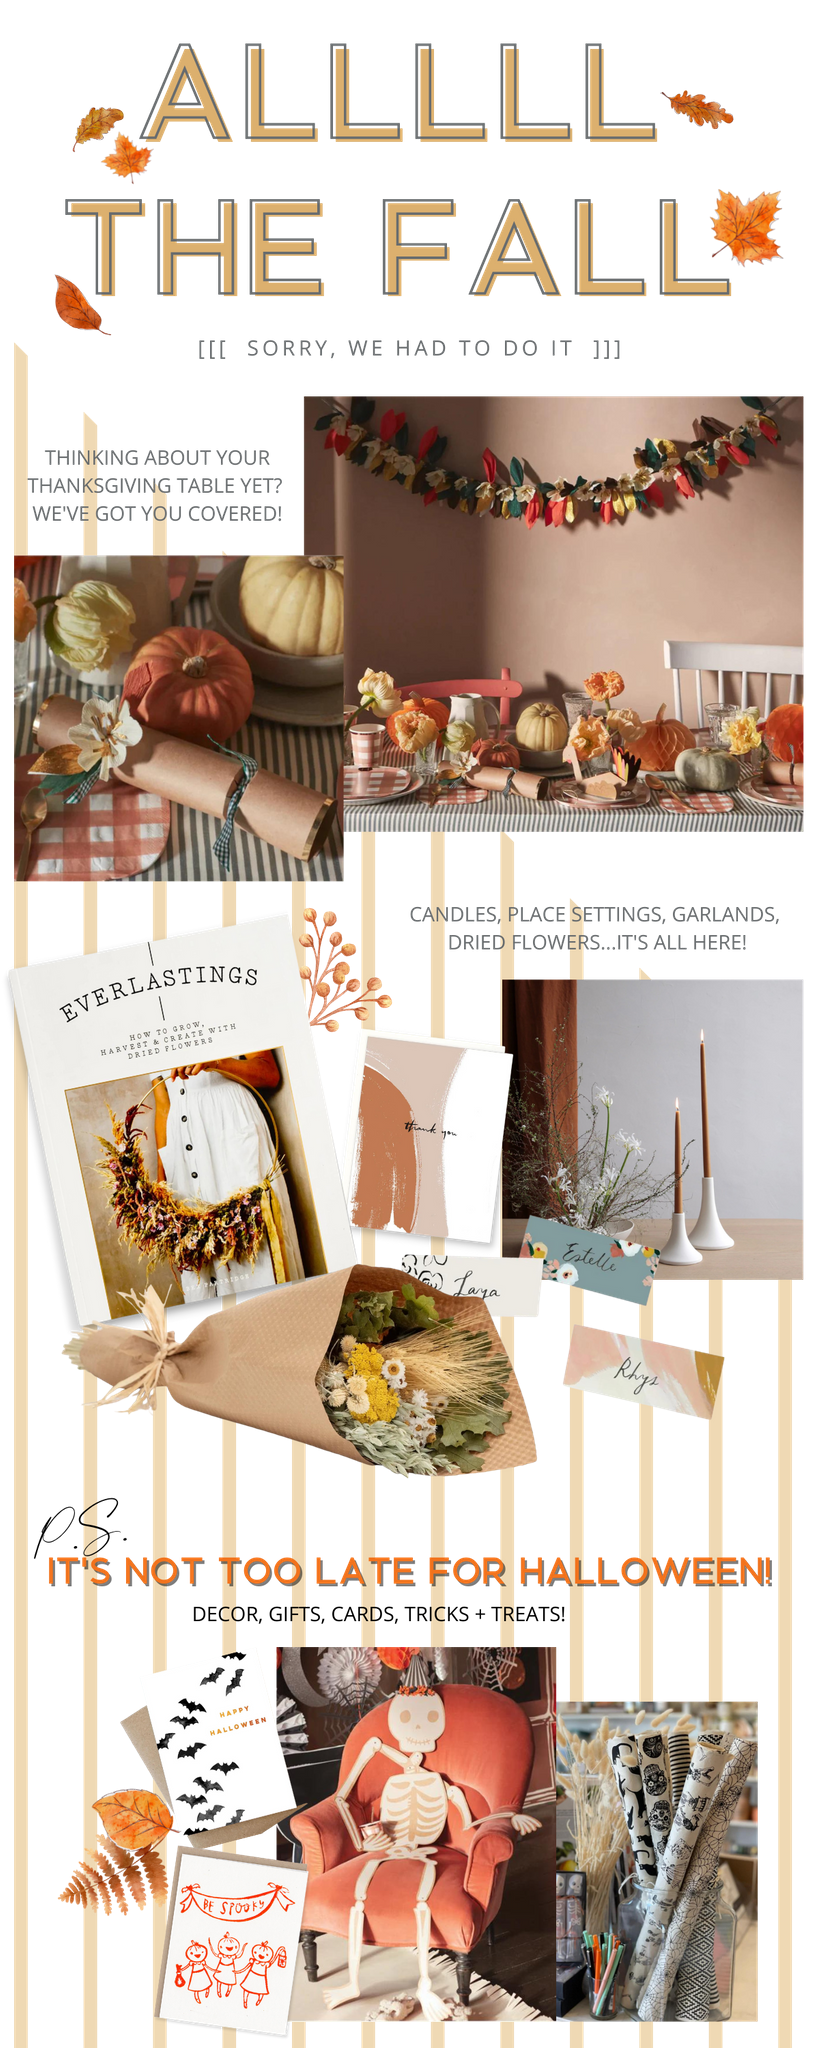 urbanic paper boutique all the fall halloween thanksgiving dried flowers crackers skeletons